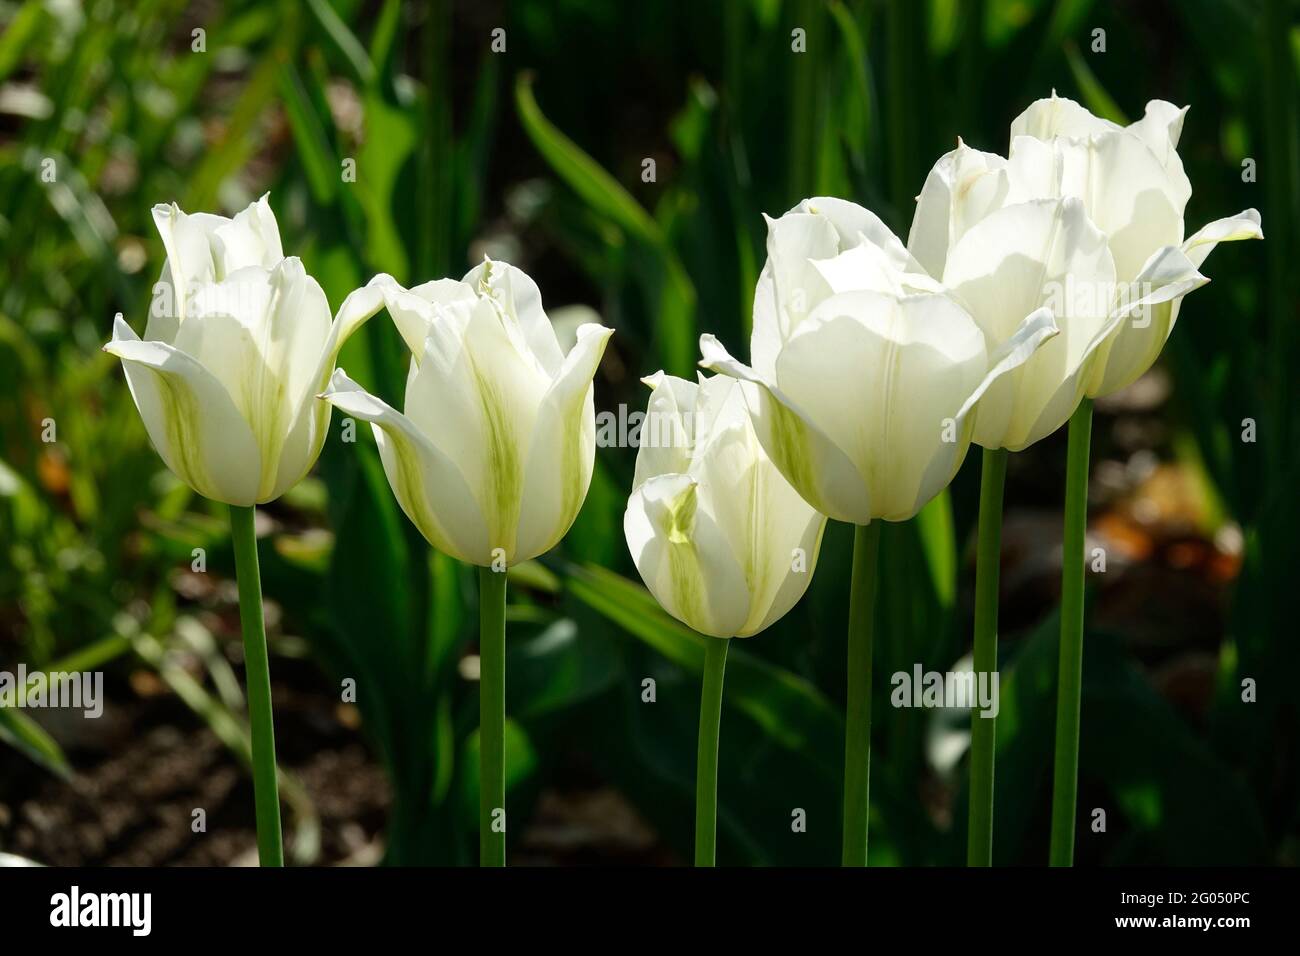 Award Winning Spring Green Viridiflora Tulips with White Petals and a soft Green Feather-like Flame Decorating the Outer Petal Stock Photo